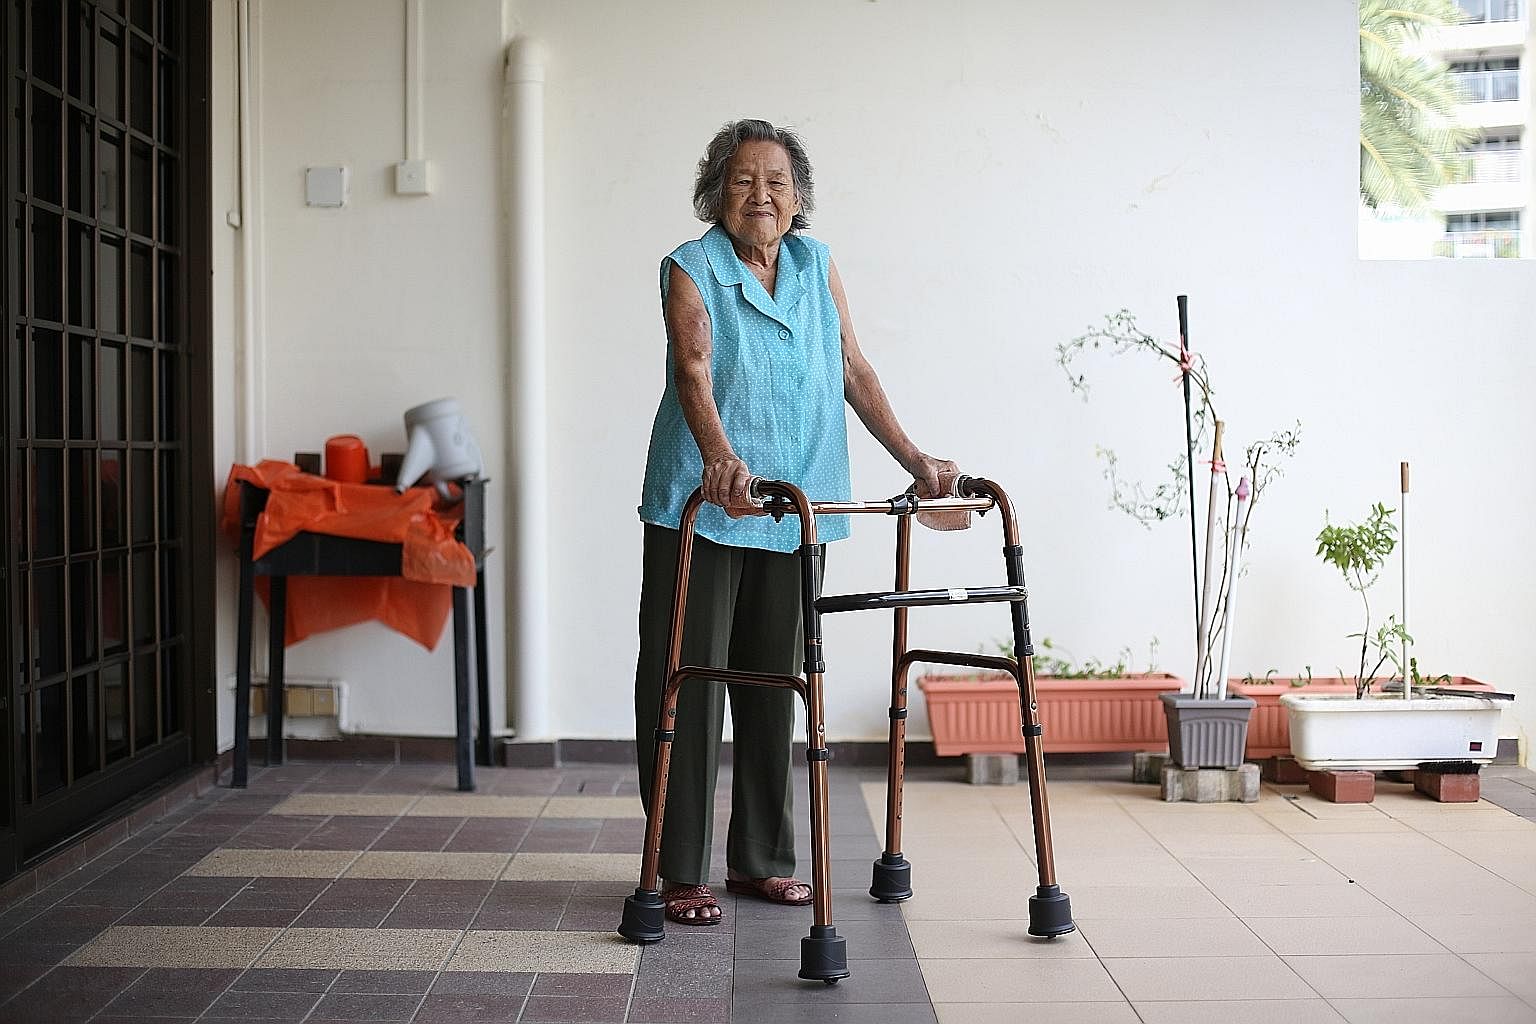 Madam Leck Peow Joo, who suffers from arthritis and end-stage kidney failure, uses the GlydeSafe frame to move around her home. Its retractable wheels allow her to push the frame instead of having to lift it with each step.